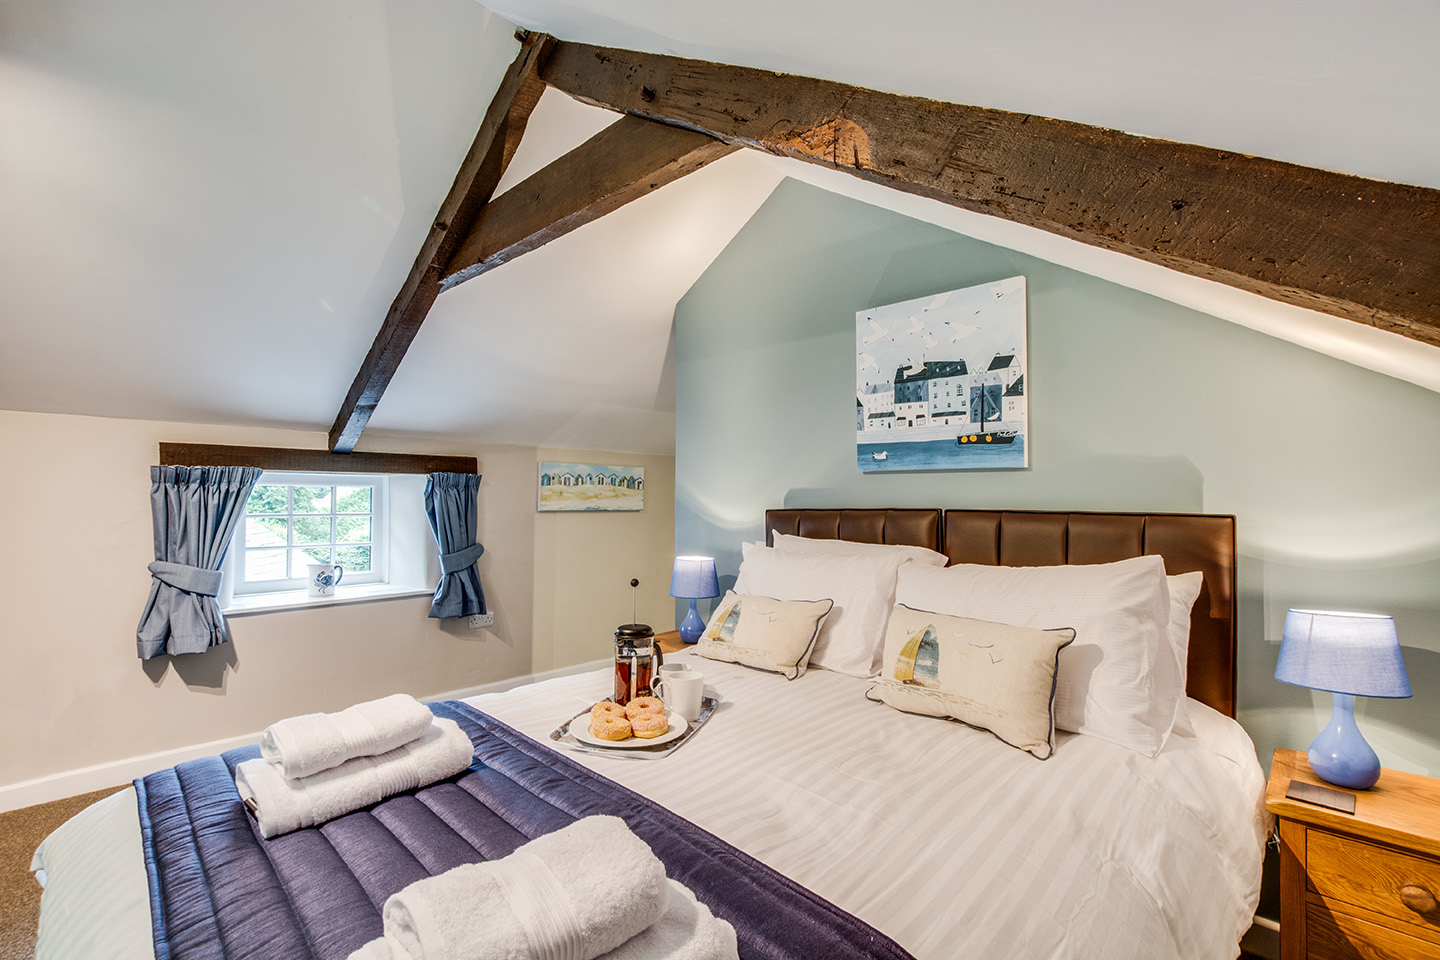 Double bedroom 2 of Troutstream luxury self catering converted barn holiday cottage at Penrose Burden in North Cornwall 01.jpg